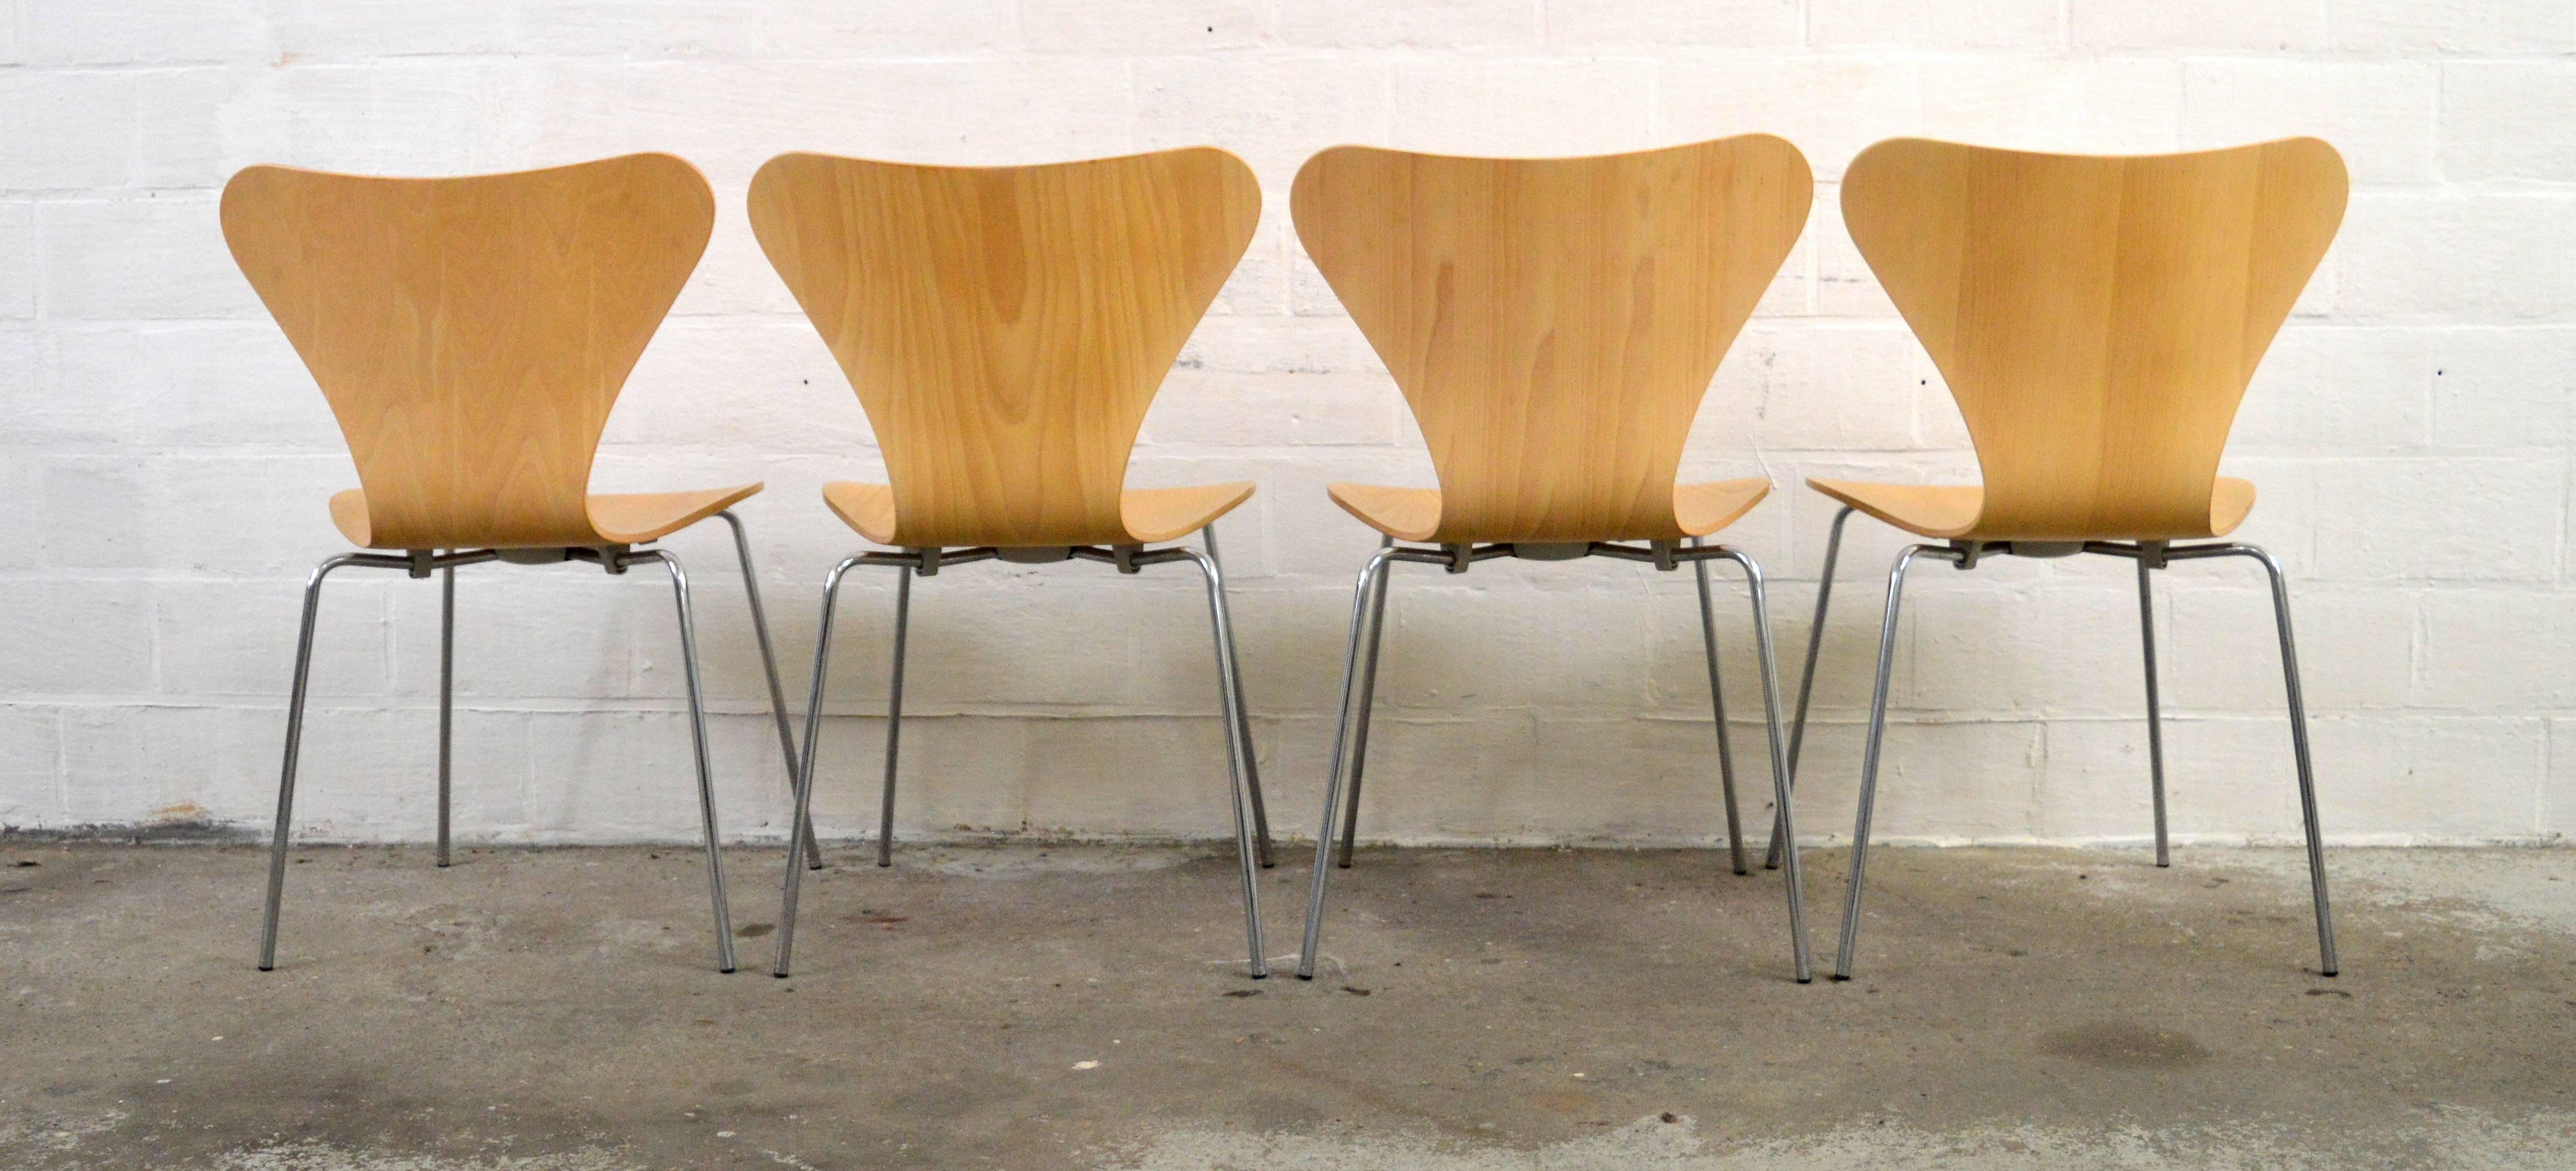 Four serie7 chairs by designer Arne Jacobsen for Fritz Hansen.
The chairs are in perfect condition.
They have a natural oak veneer.